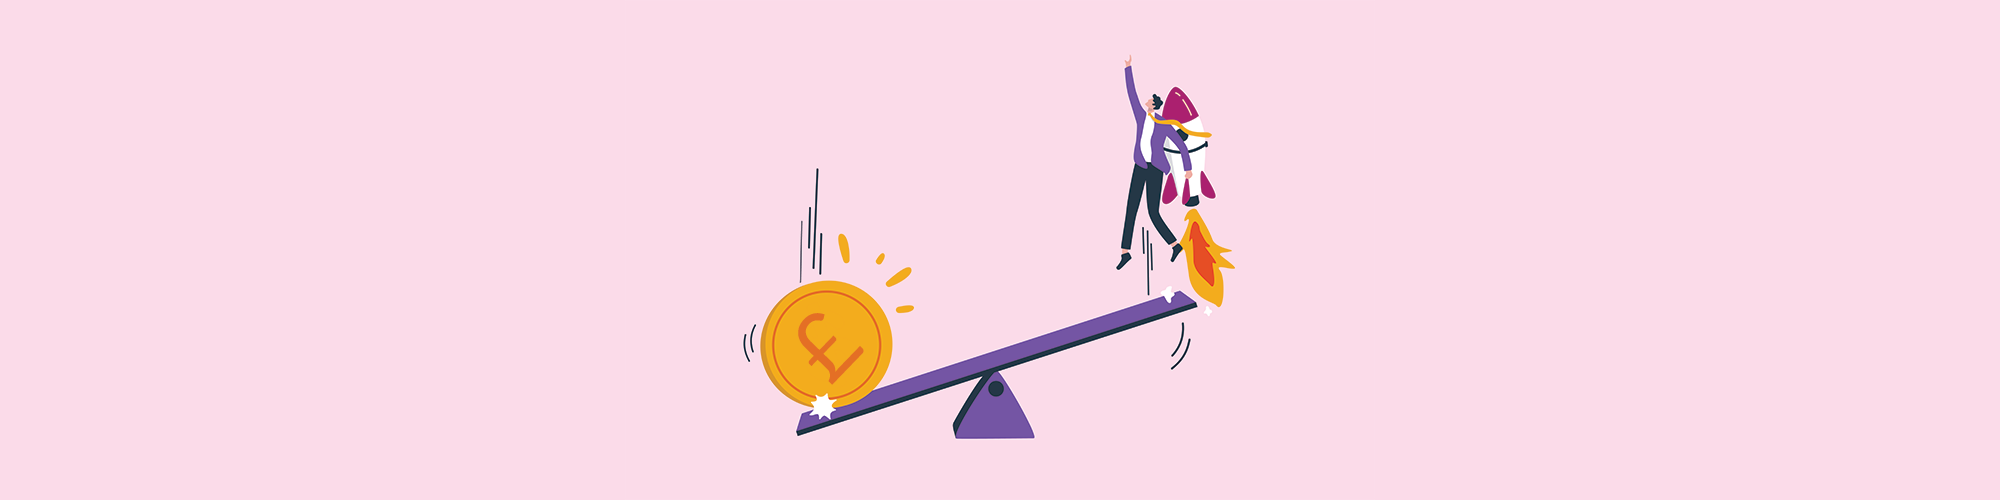 A giant pound coin lands on a see-saw rocketing a business person up into the air. Get a watertight loan agreement for your Directors Loan To Company, from Parachute Law Solicitors